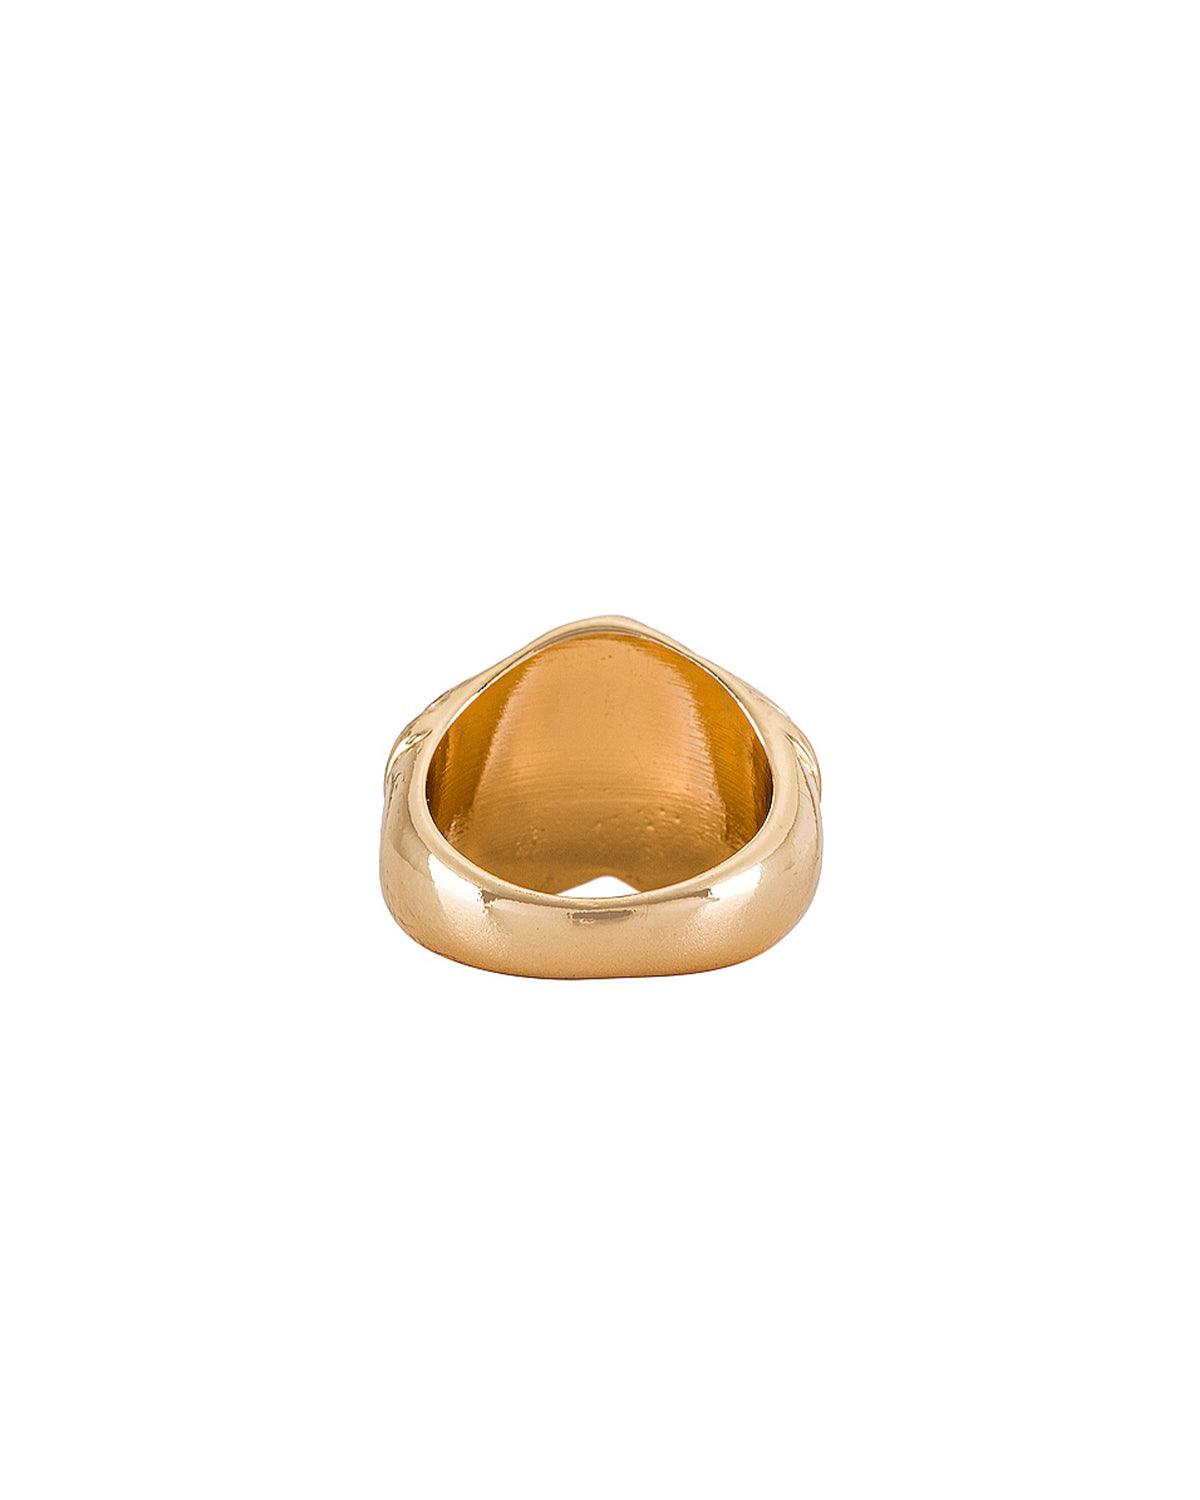 GOLD RING WITH BLUE STAR - 8 Other Reasons